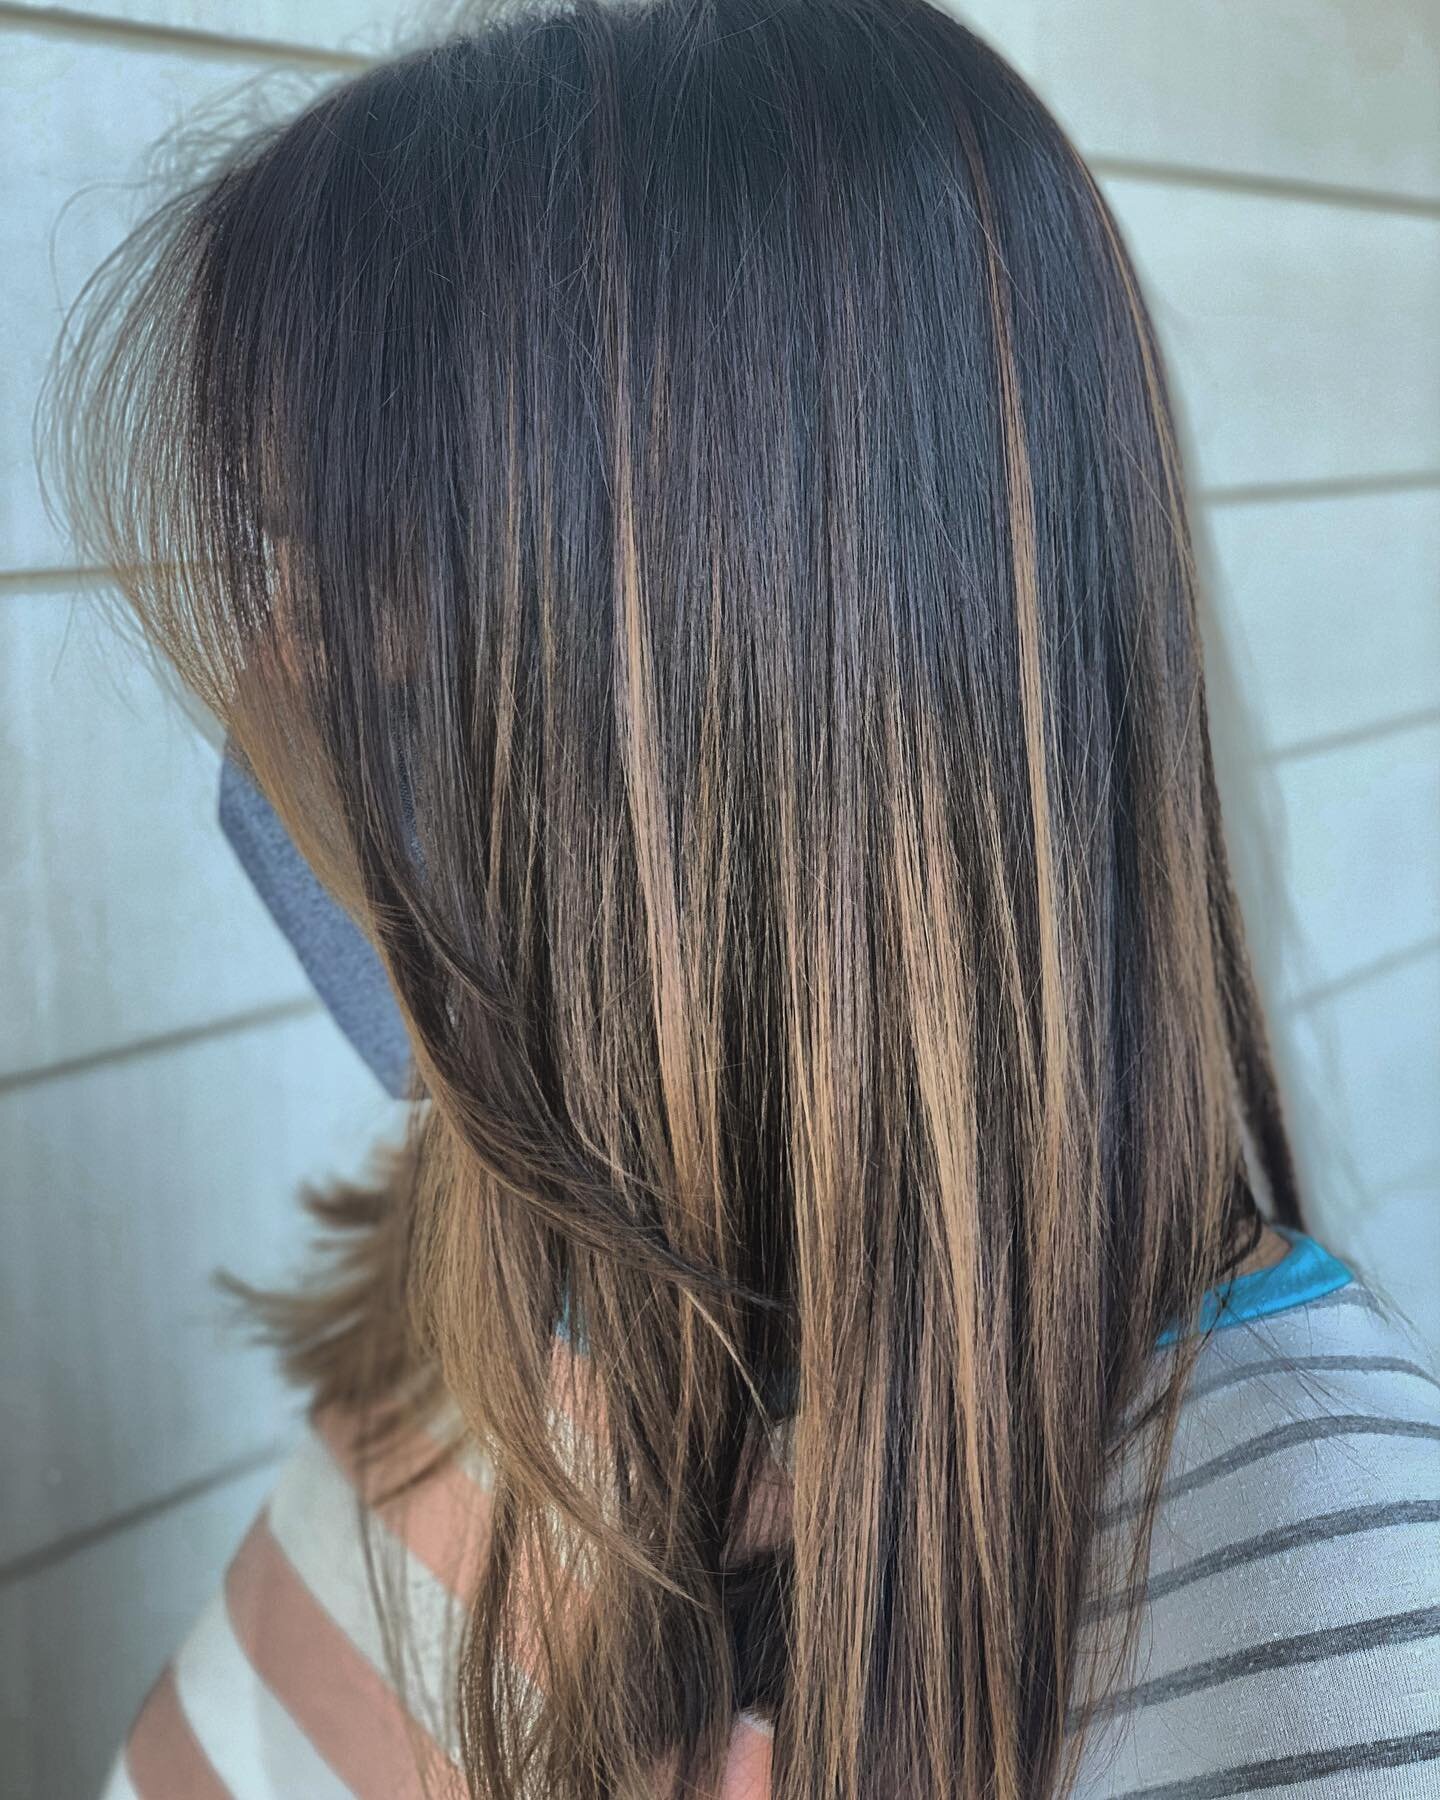 This lovely lady came in with a grown out, pretty bright and brassy balayage. We glossed her to a lovely caramel that&rsquo;s much more blended and soft.